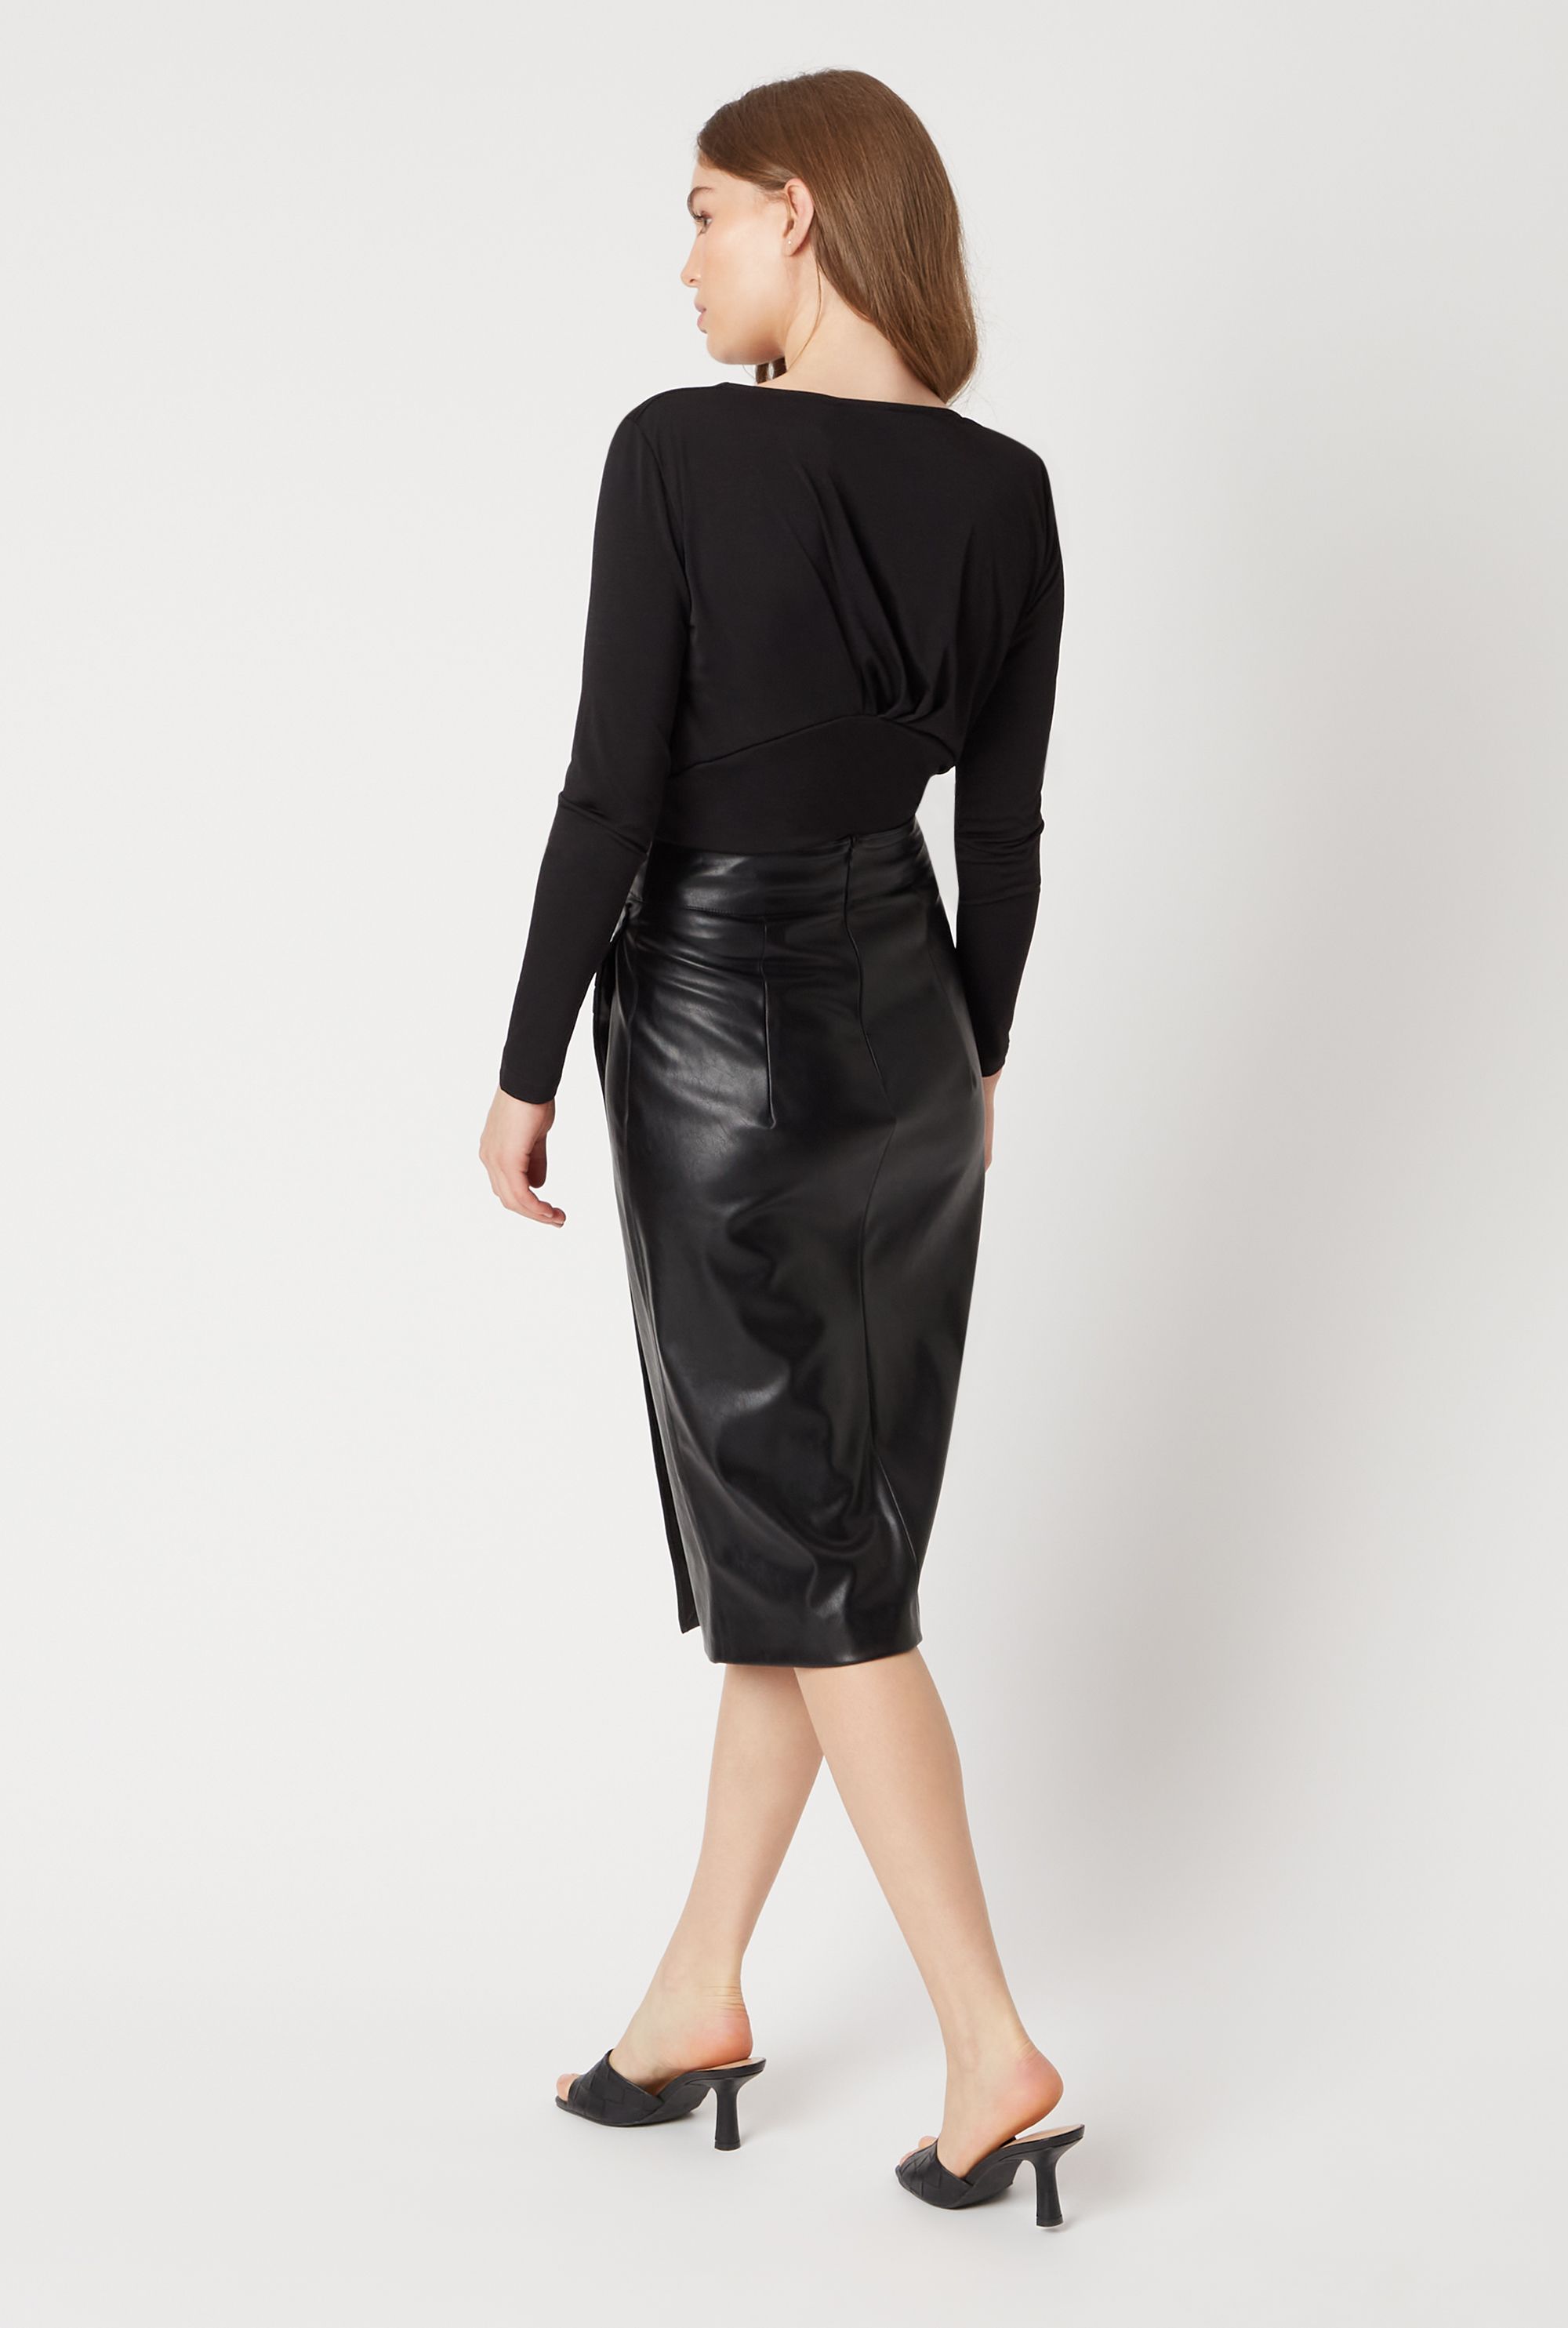 Crafted in the softest faux leather, featuring a gathered ruched high waist and finished with a side slit all the way down, this fitted midi skirt is sculpted to a slim flattering fit, falling below the knee.  A must for all year round to love season after season for an elegant on trend wardrobe essential.